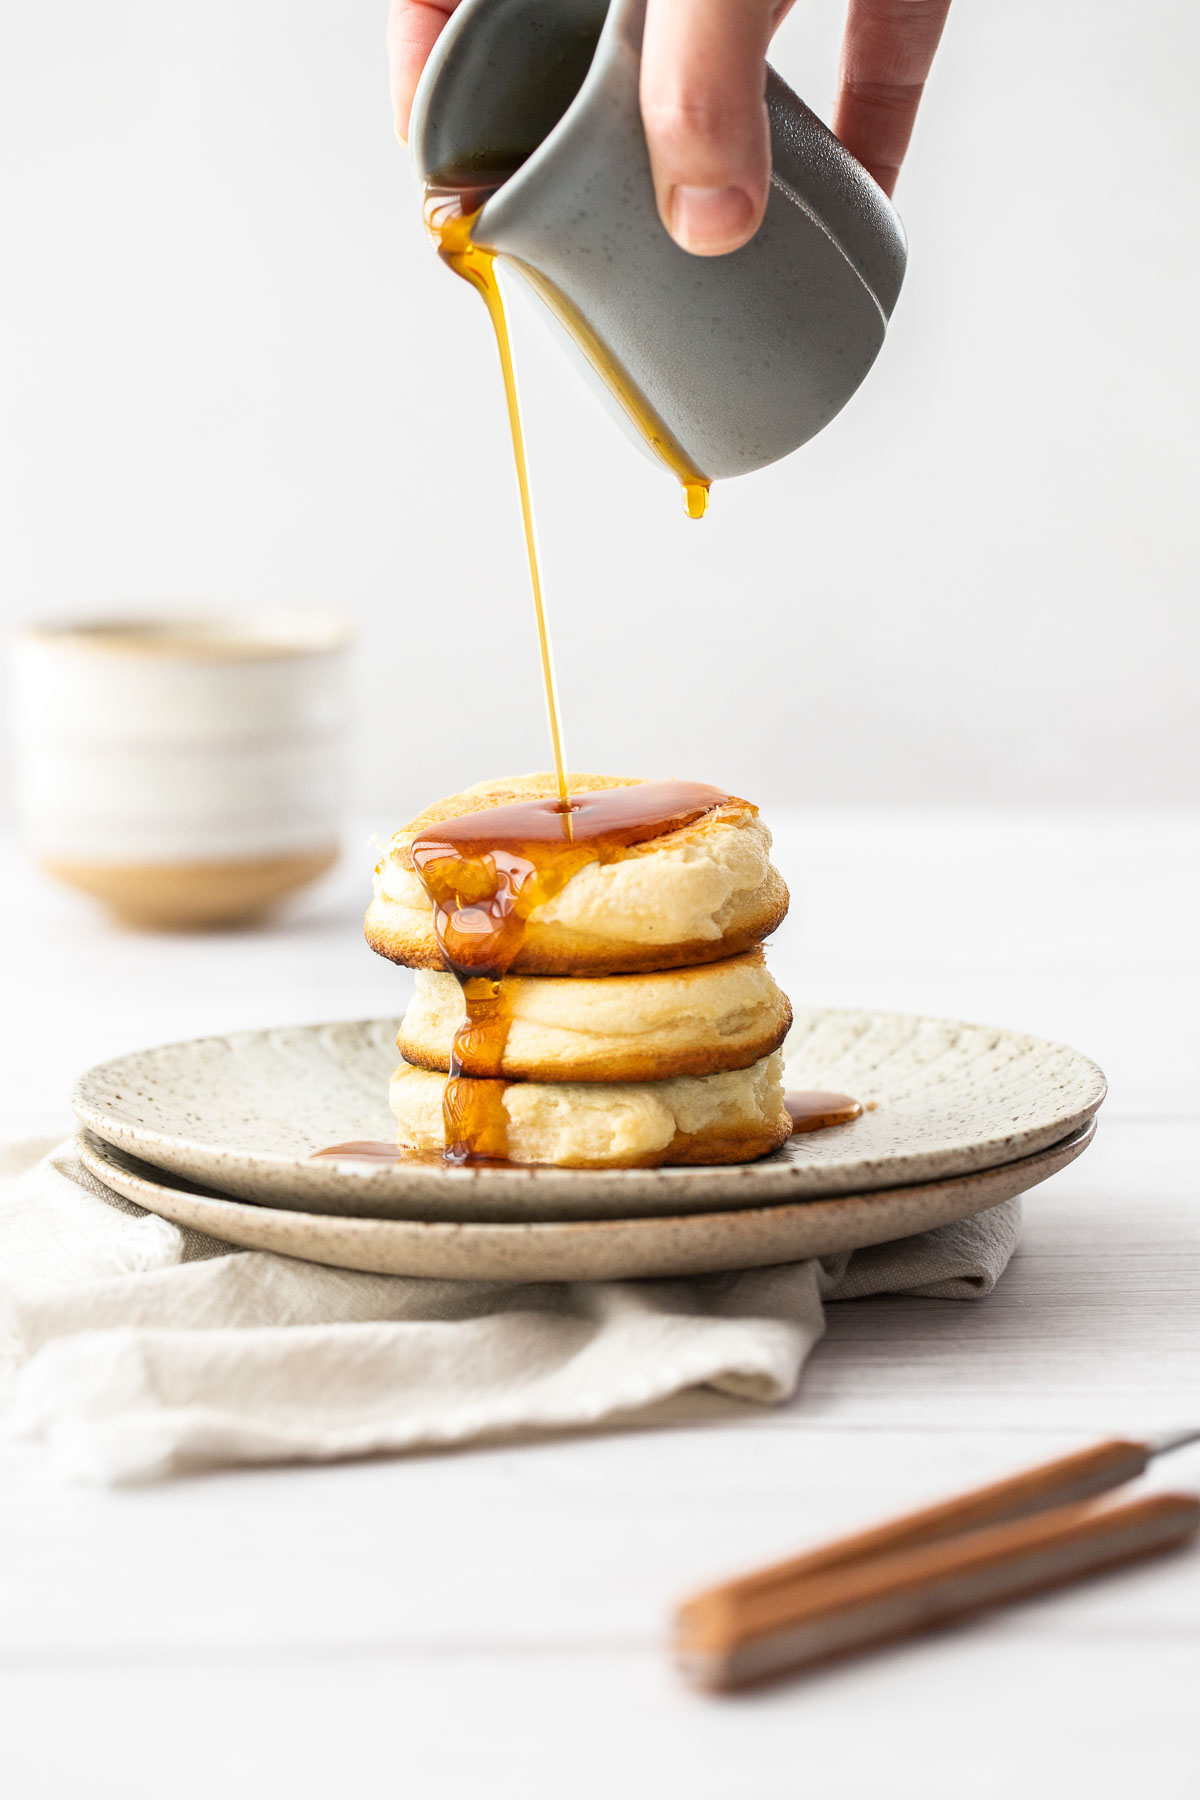 Maple syrup being poured on to a stack of three Japanese souffle pancakes.